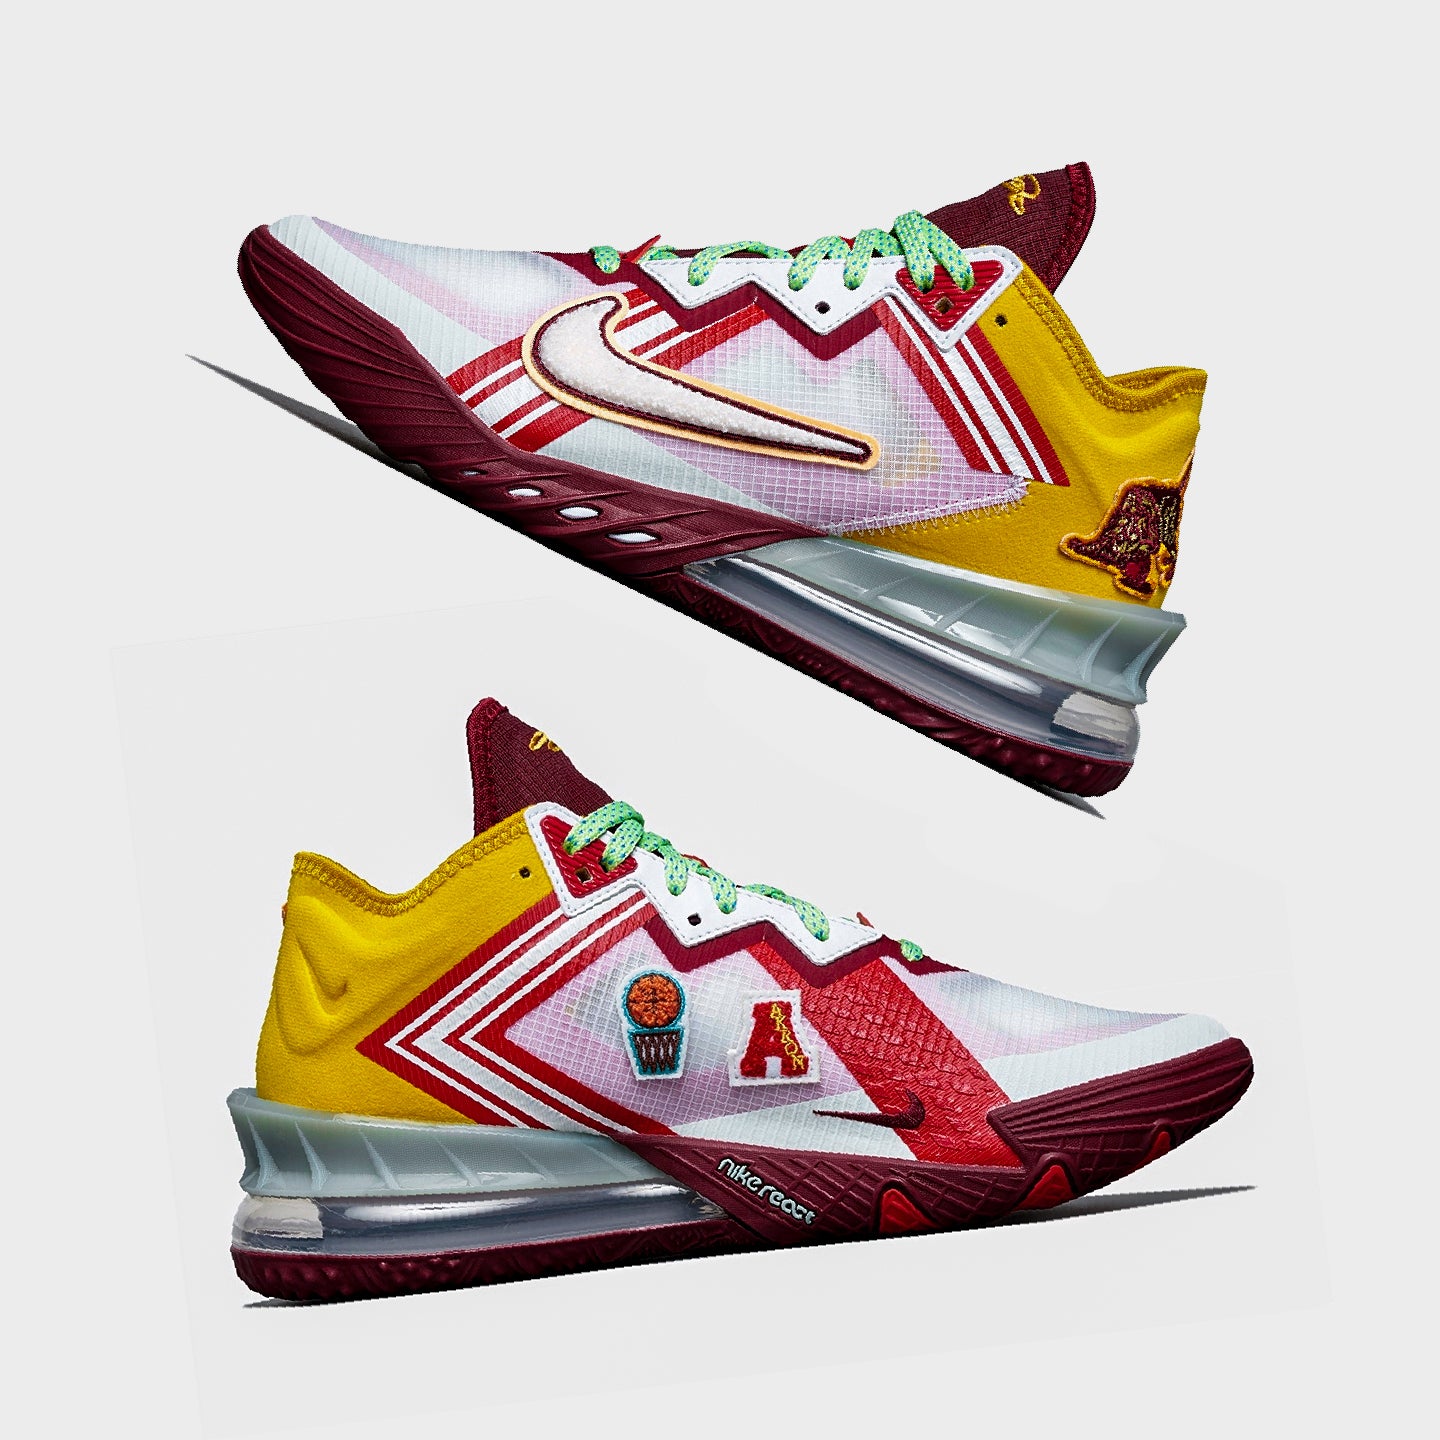 lebron higher learning shoes